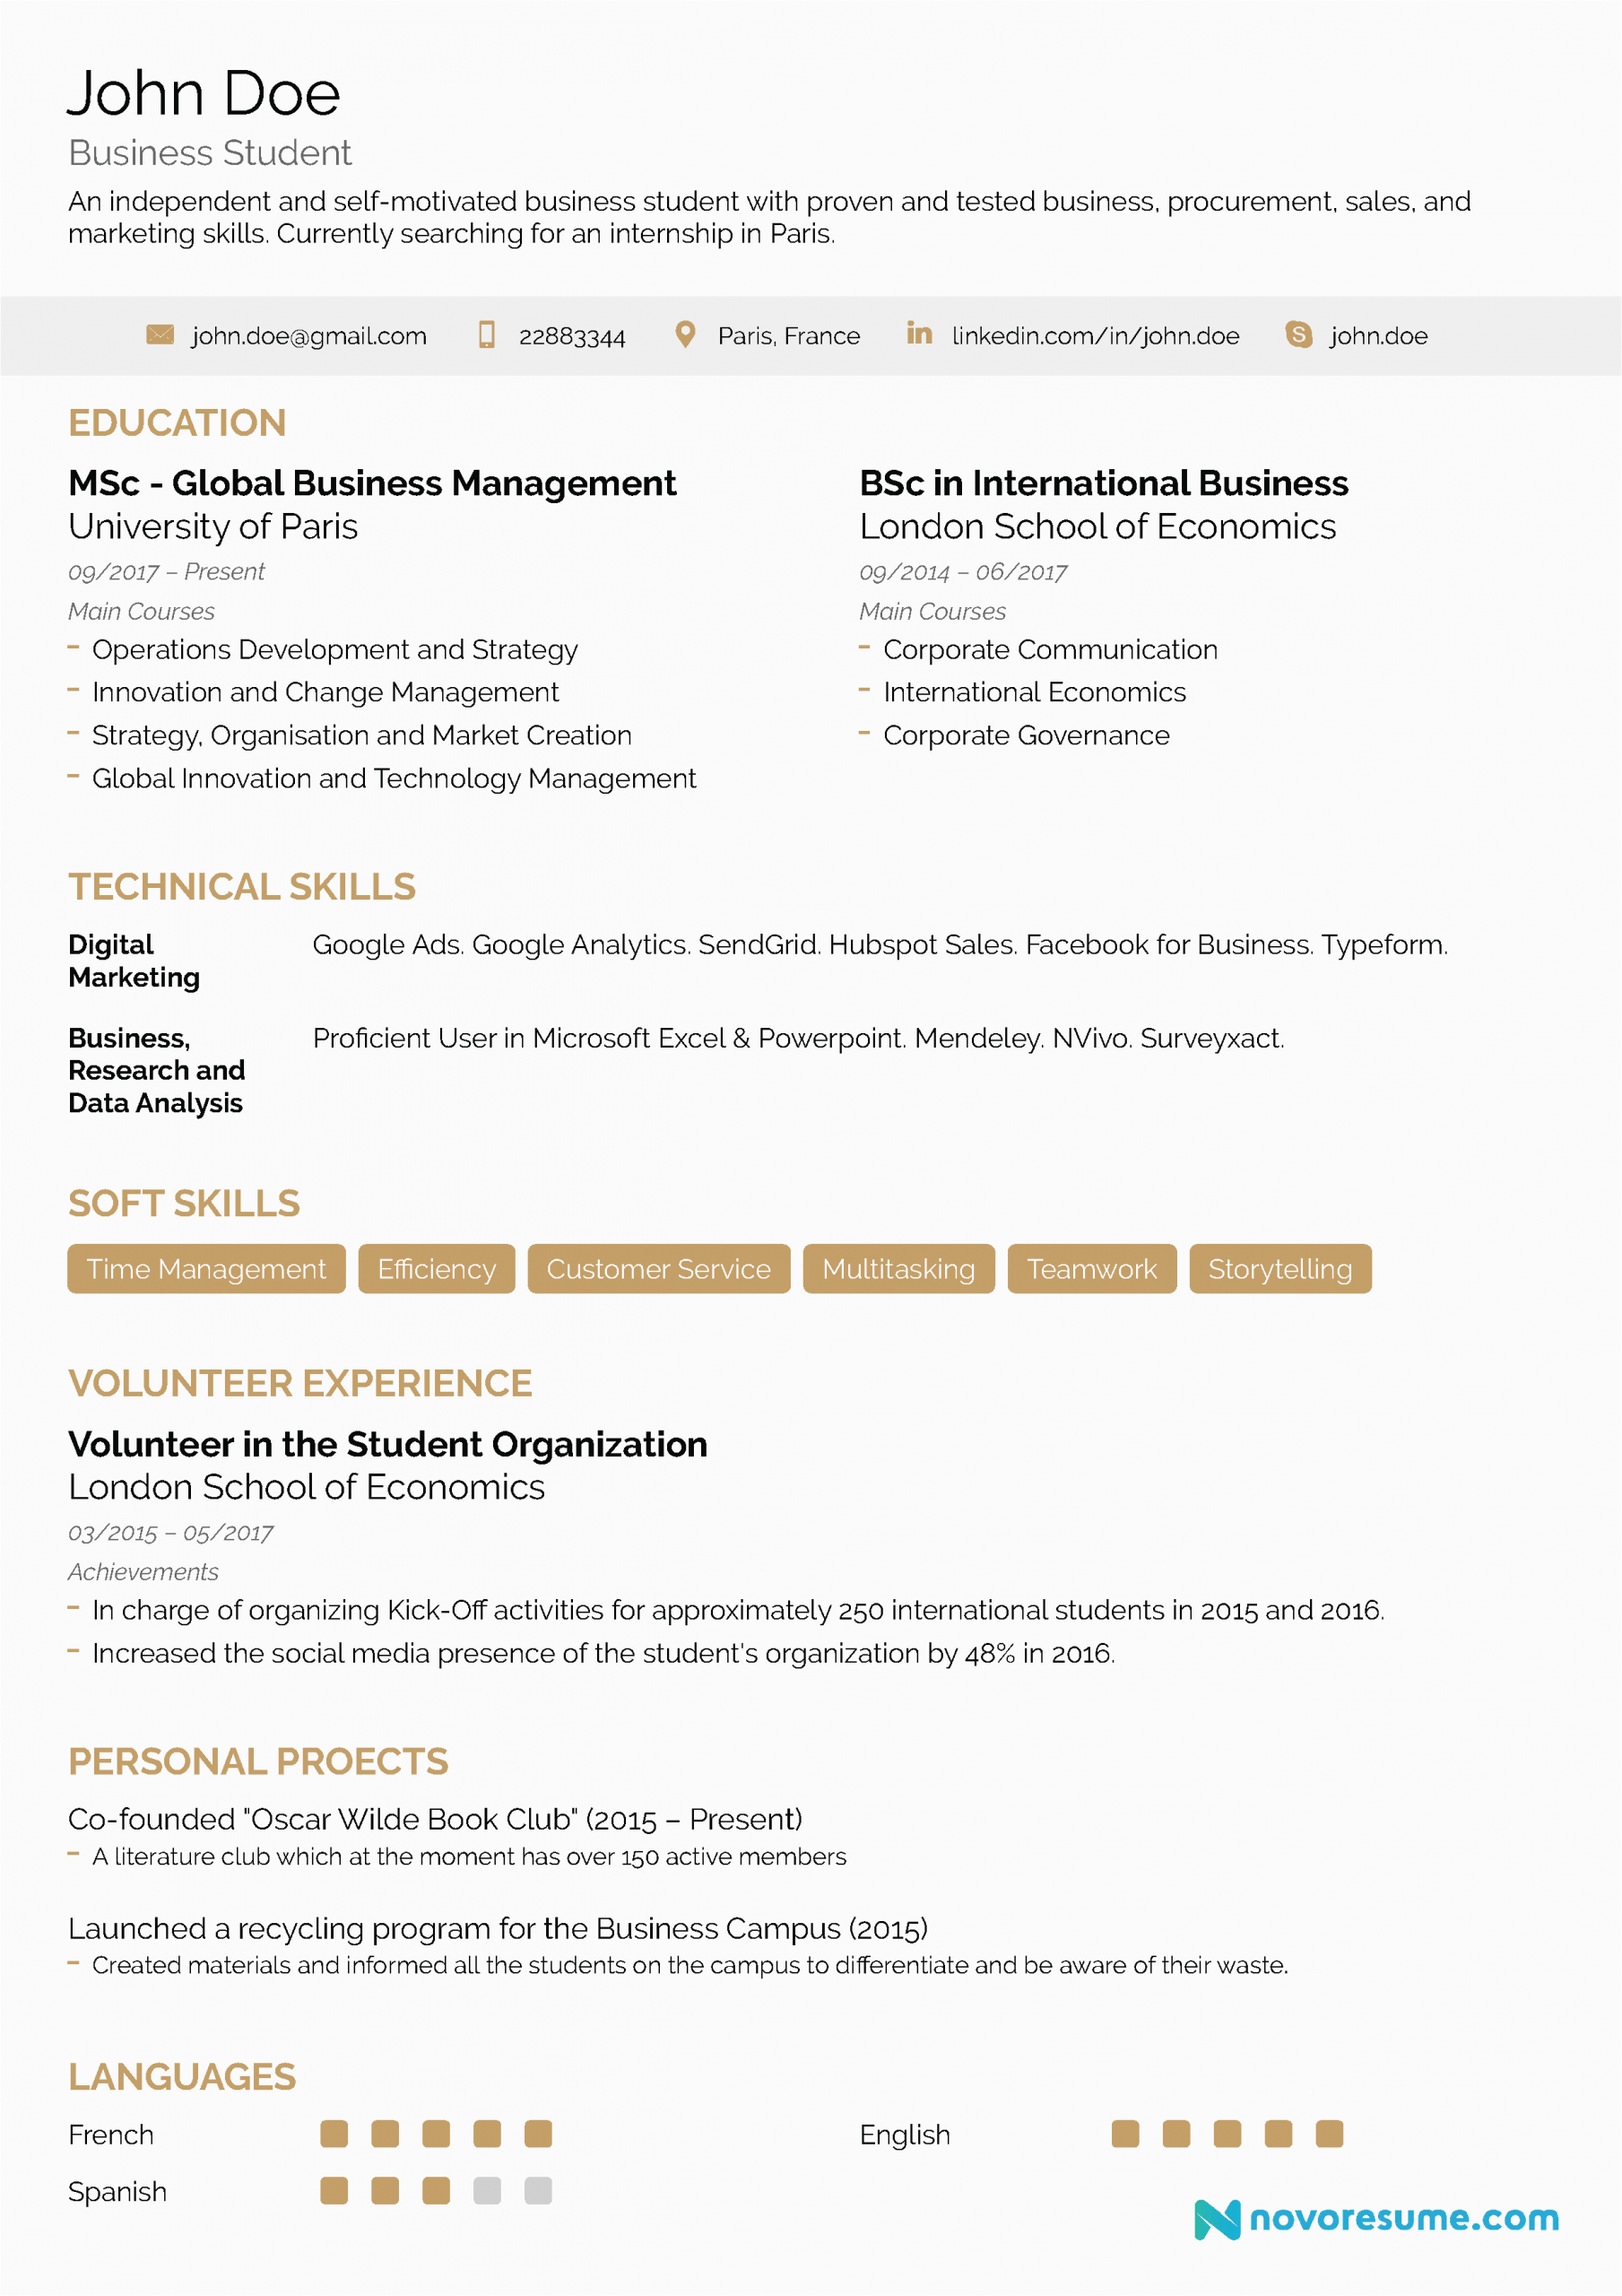 Beginners Resume with No Experience Template Grade 10 Teenager High School Student Resume with No Work